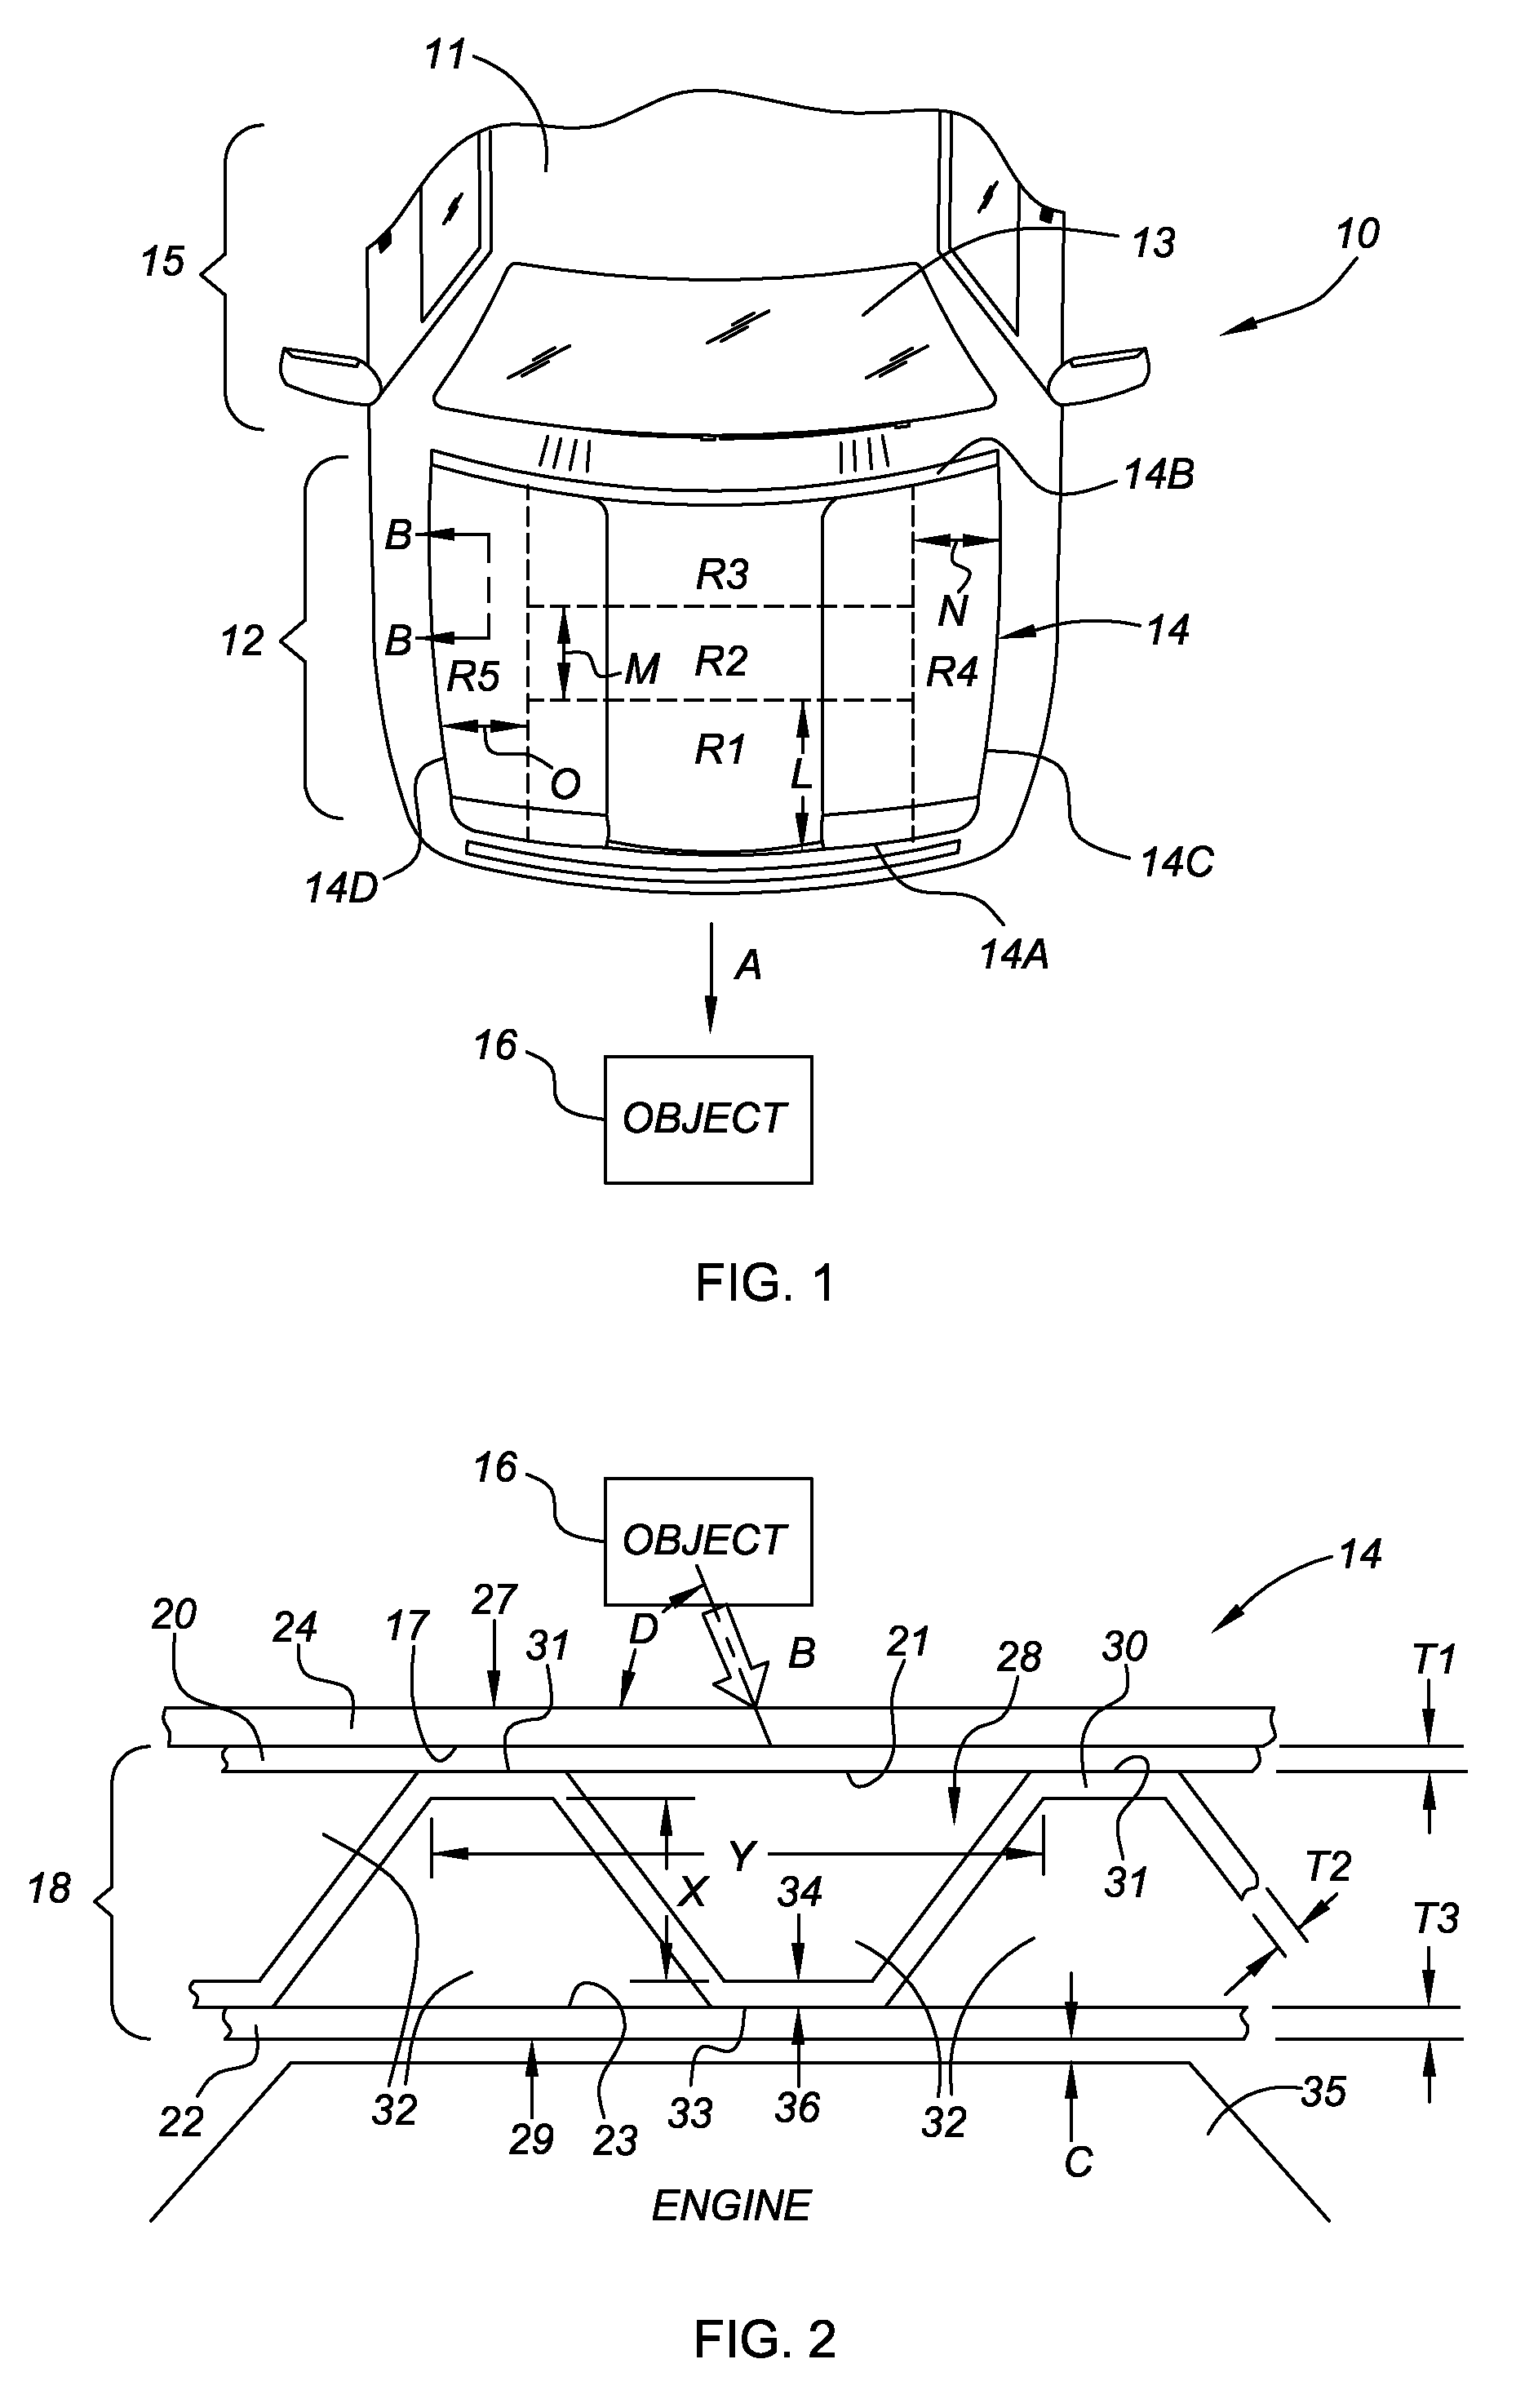 Vehicle Hood With Sandwich Inner Structure